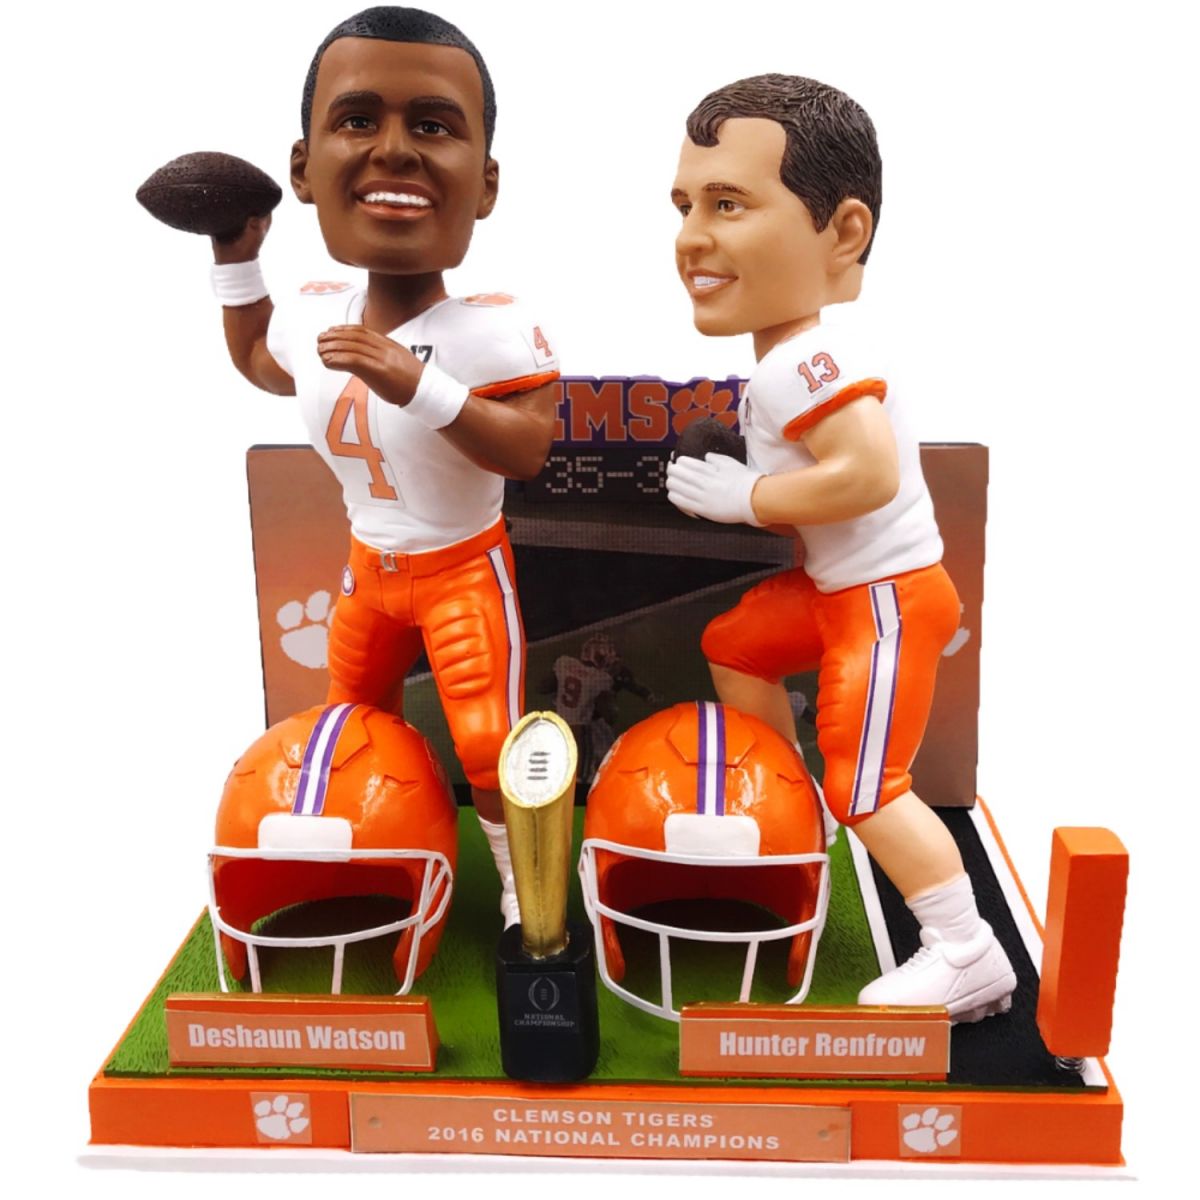 The National Bobblehead Hall of Fame and Museum has unveiled a dual bobblehead commemorating former Clemson QB Deshaun Watson's game-winning TD pass to Hunter Renfrow in the 2017 national championship game. (Photo/Provided)